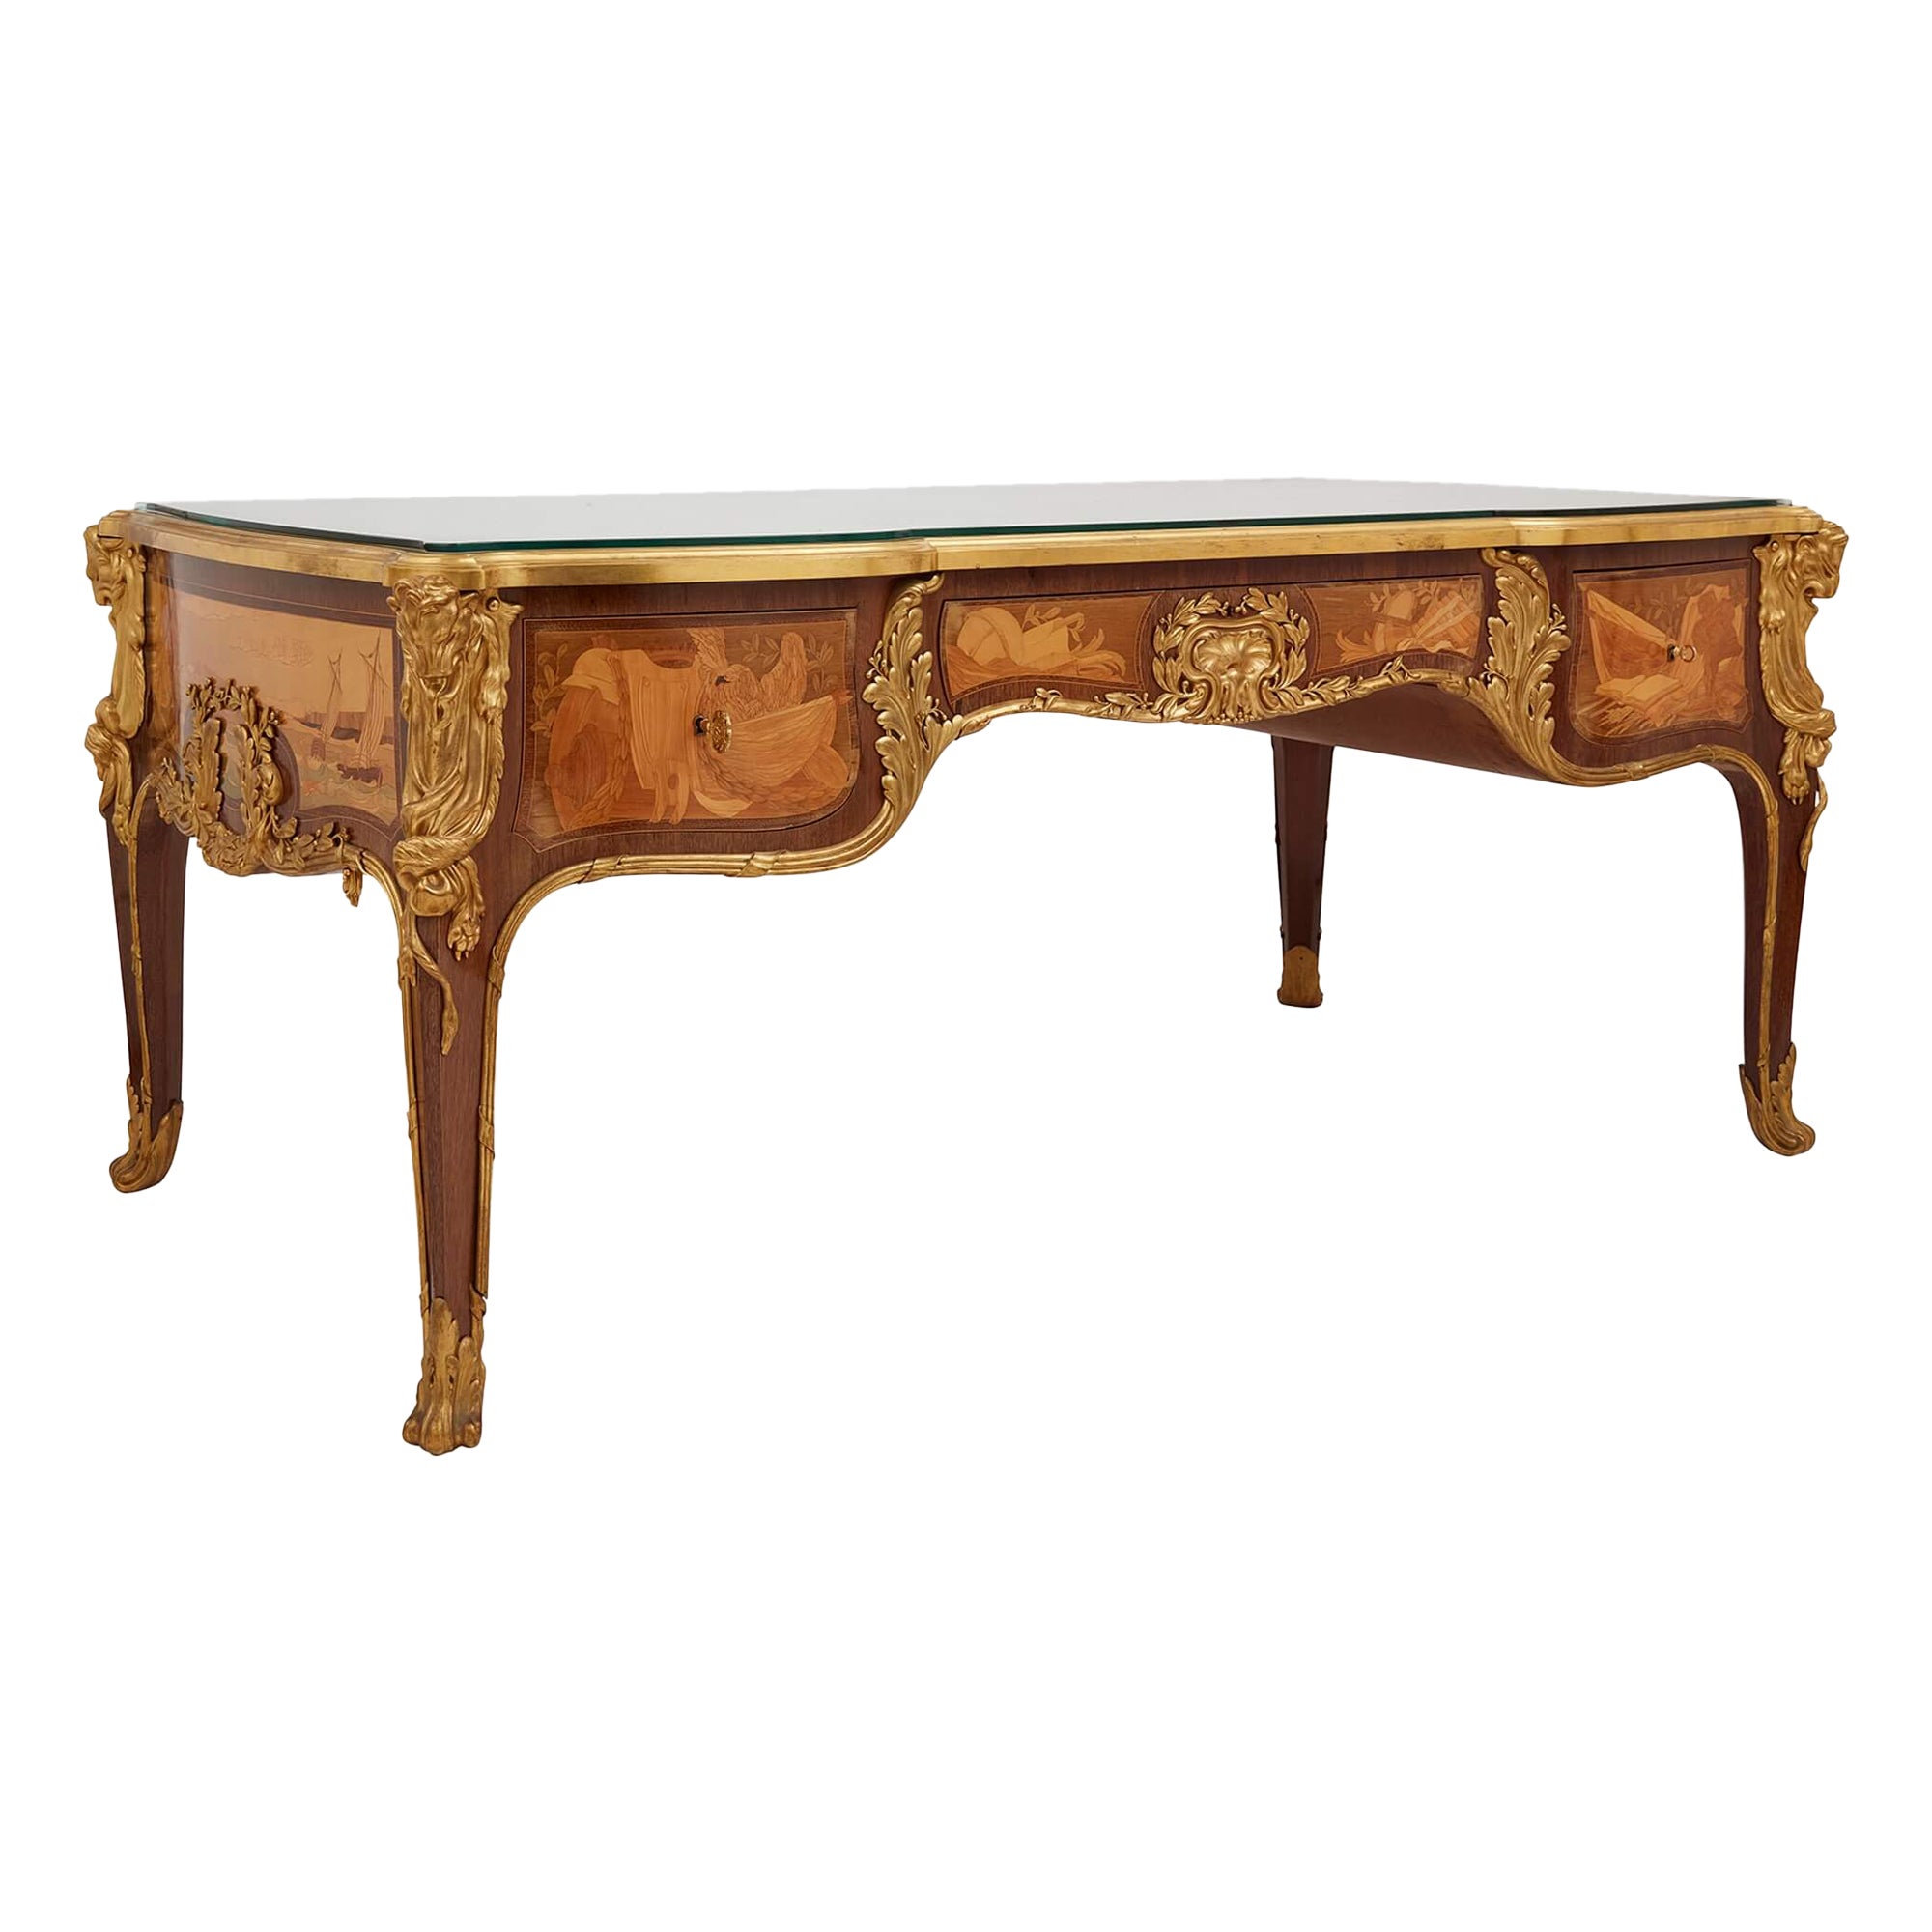 Antique French Louis XV Style Ormolu Mounted Marquetry Desk by Maison Léger For Sale